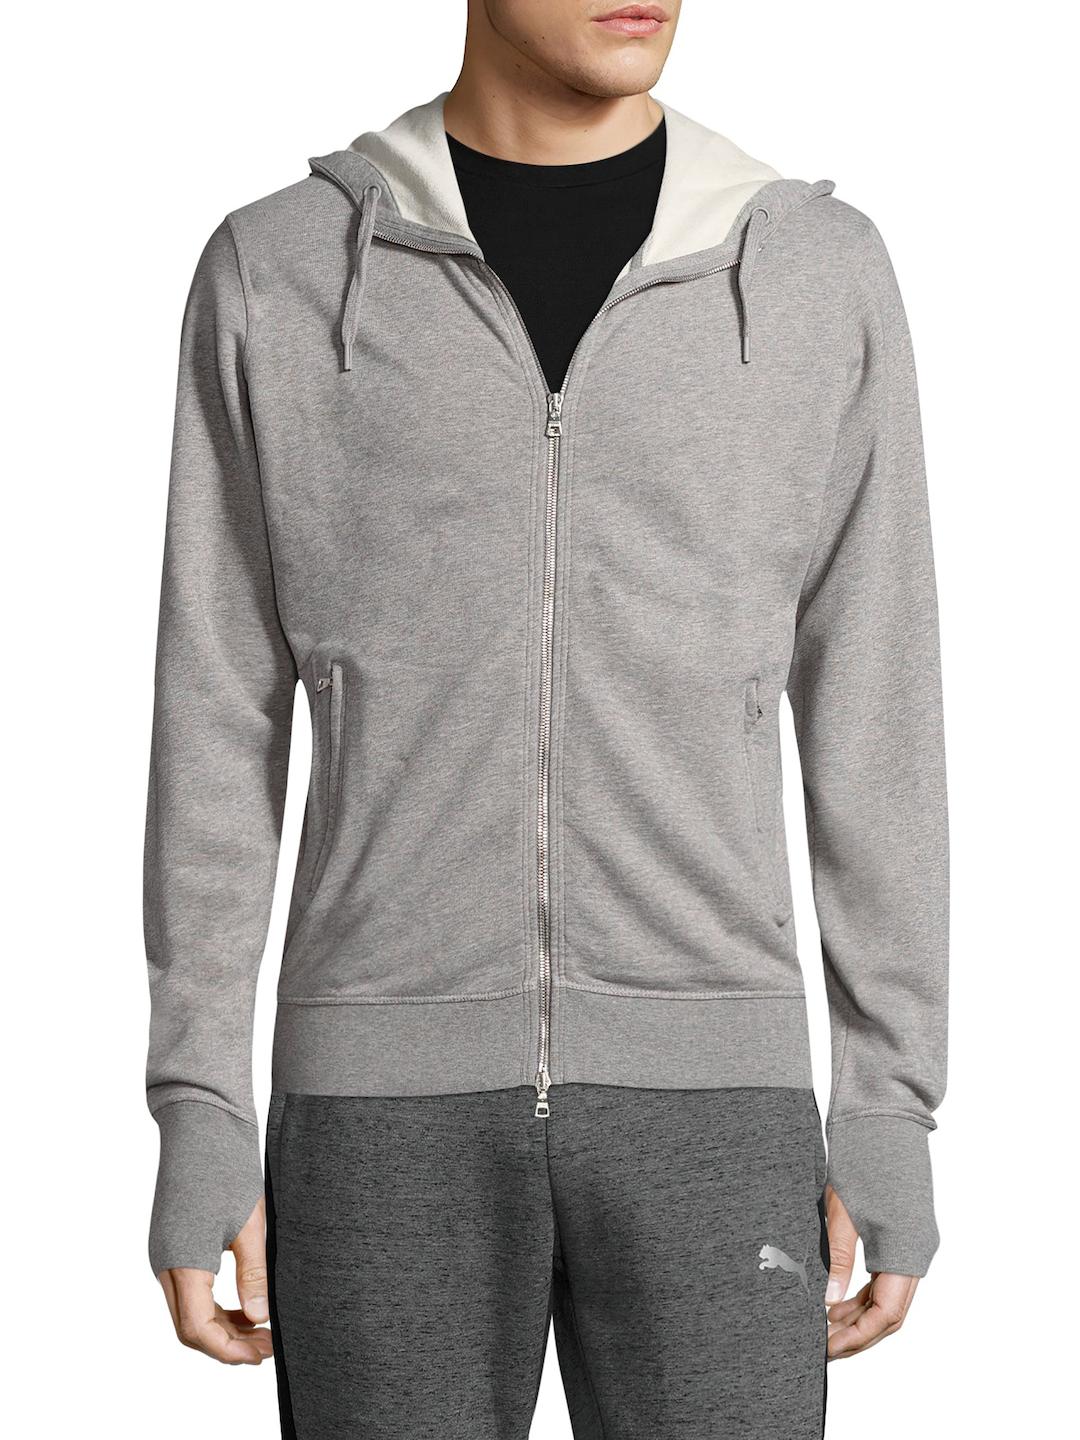 Orlebar Brown Thumb Slit Cuff Zip Front Hoodie in Gray for Men - Lyst